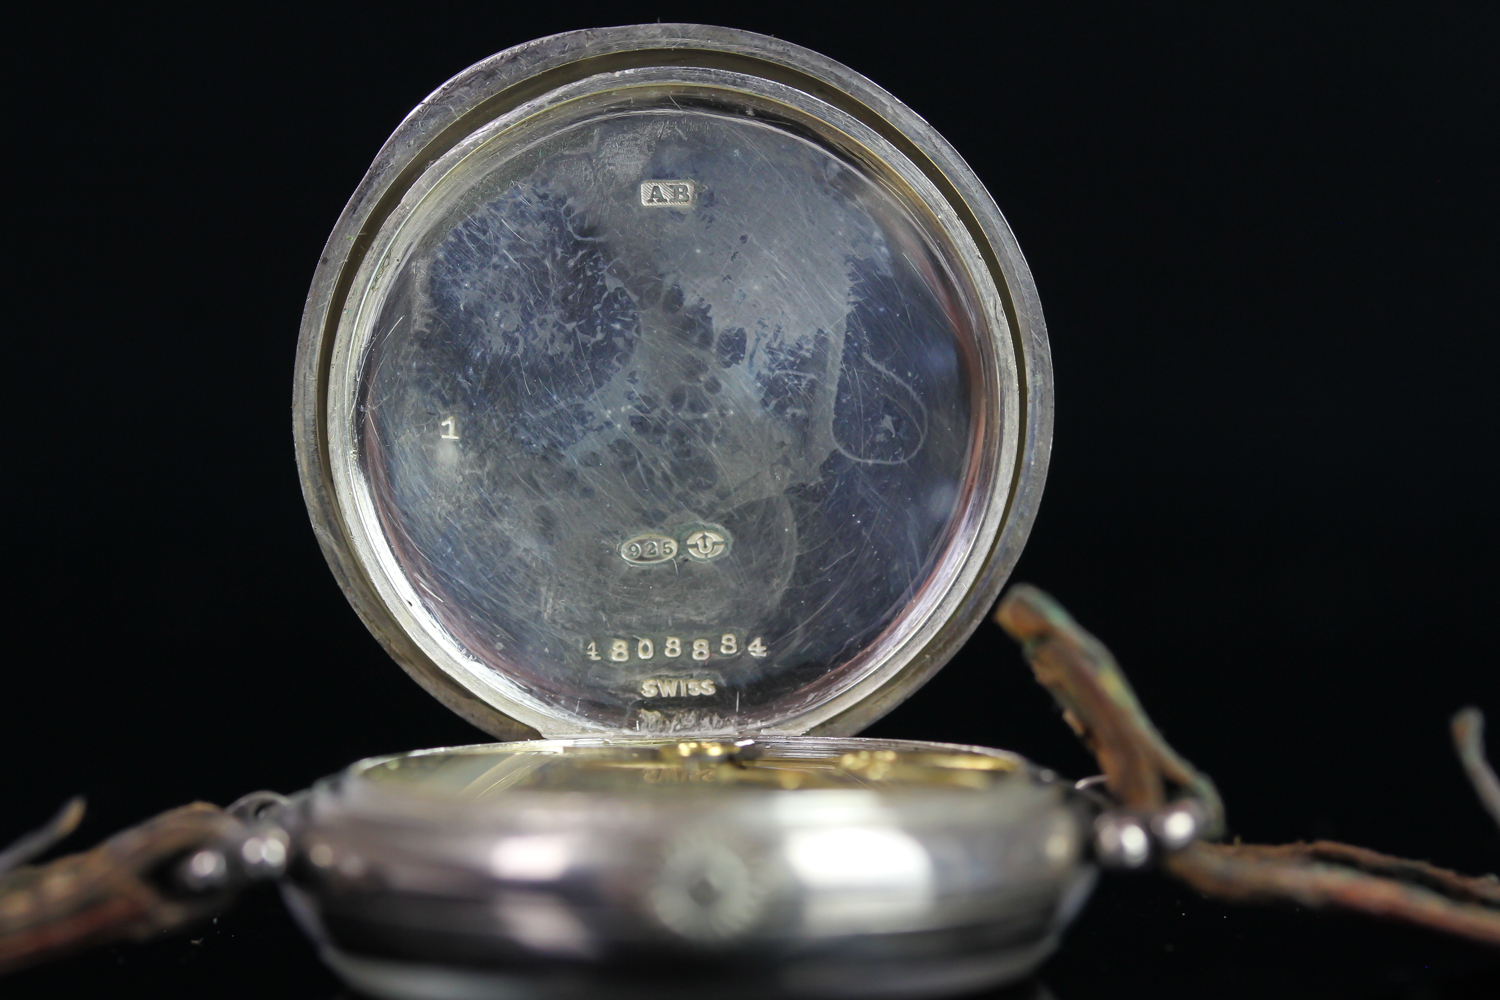 Rare Longines Albino Trench Watch, circular white porcelain dial with white Arabic numerals, - Image 6 of 7